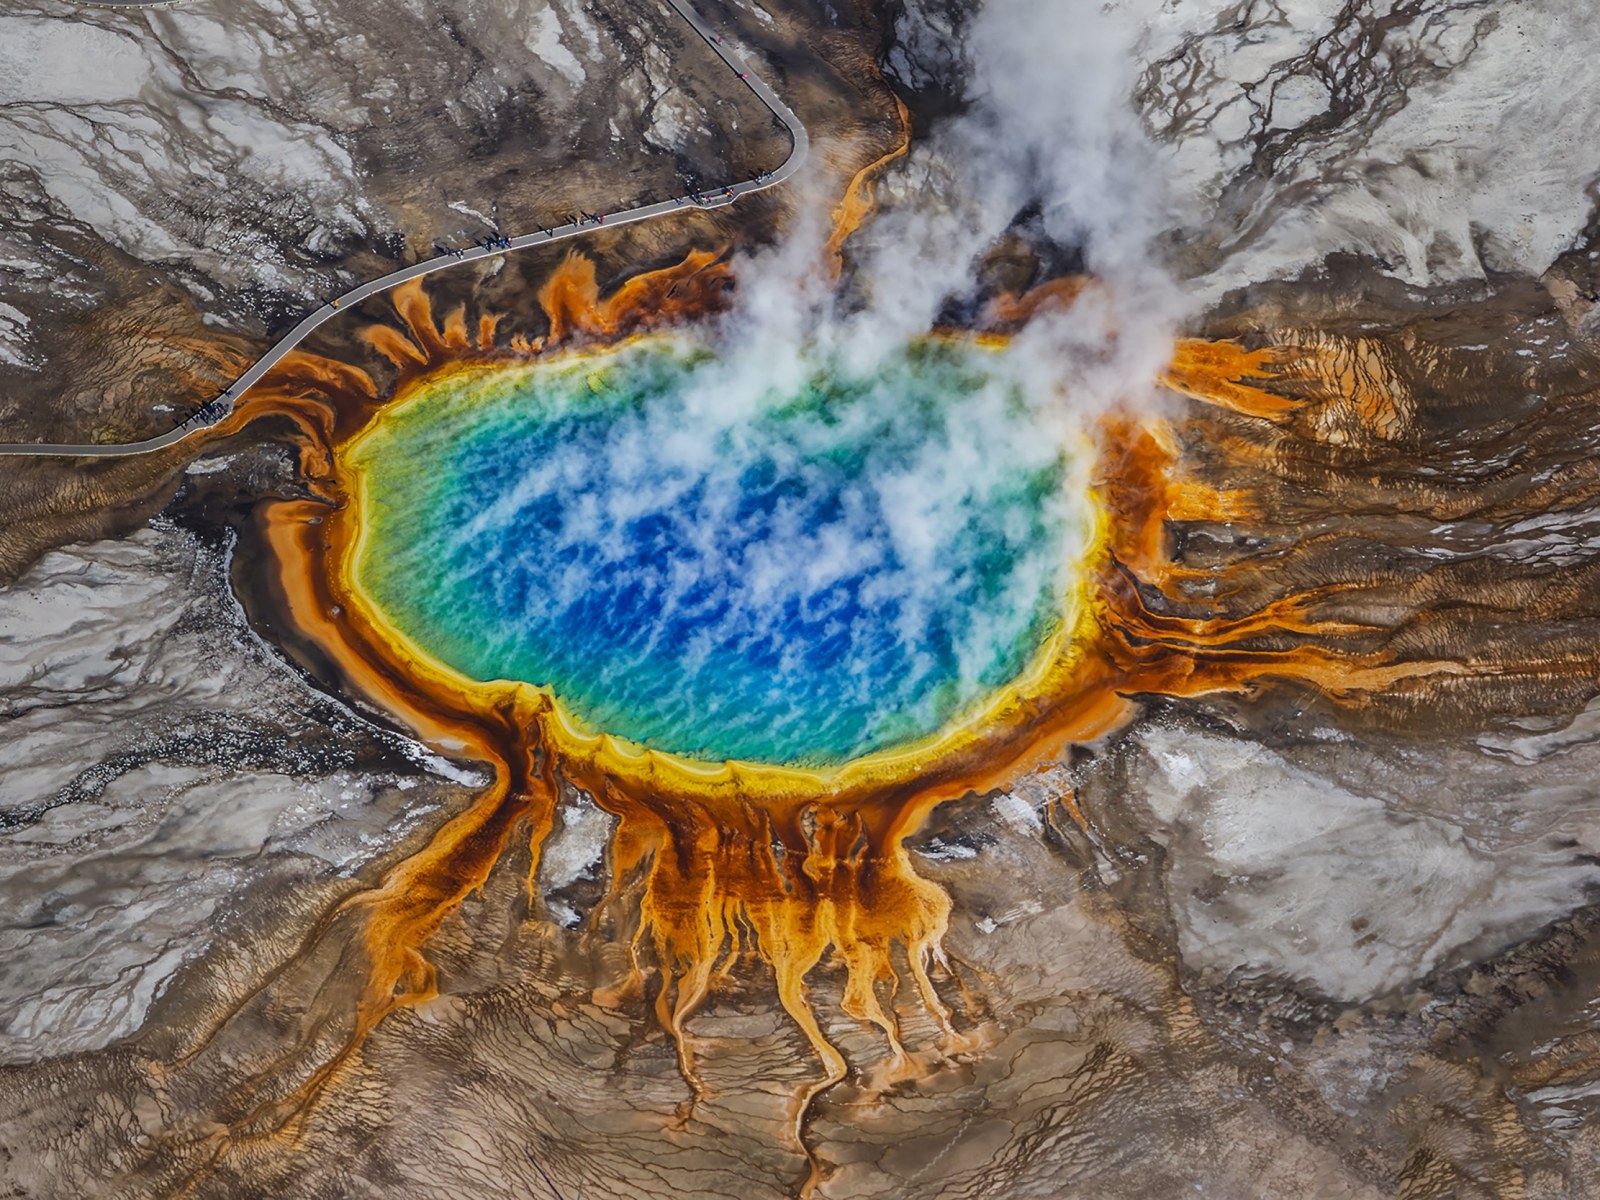 Yellowstone Supervolcano Had Eruptive Episodes With 'Highly Clustered' Lava Flows